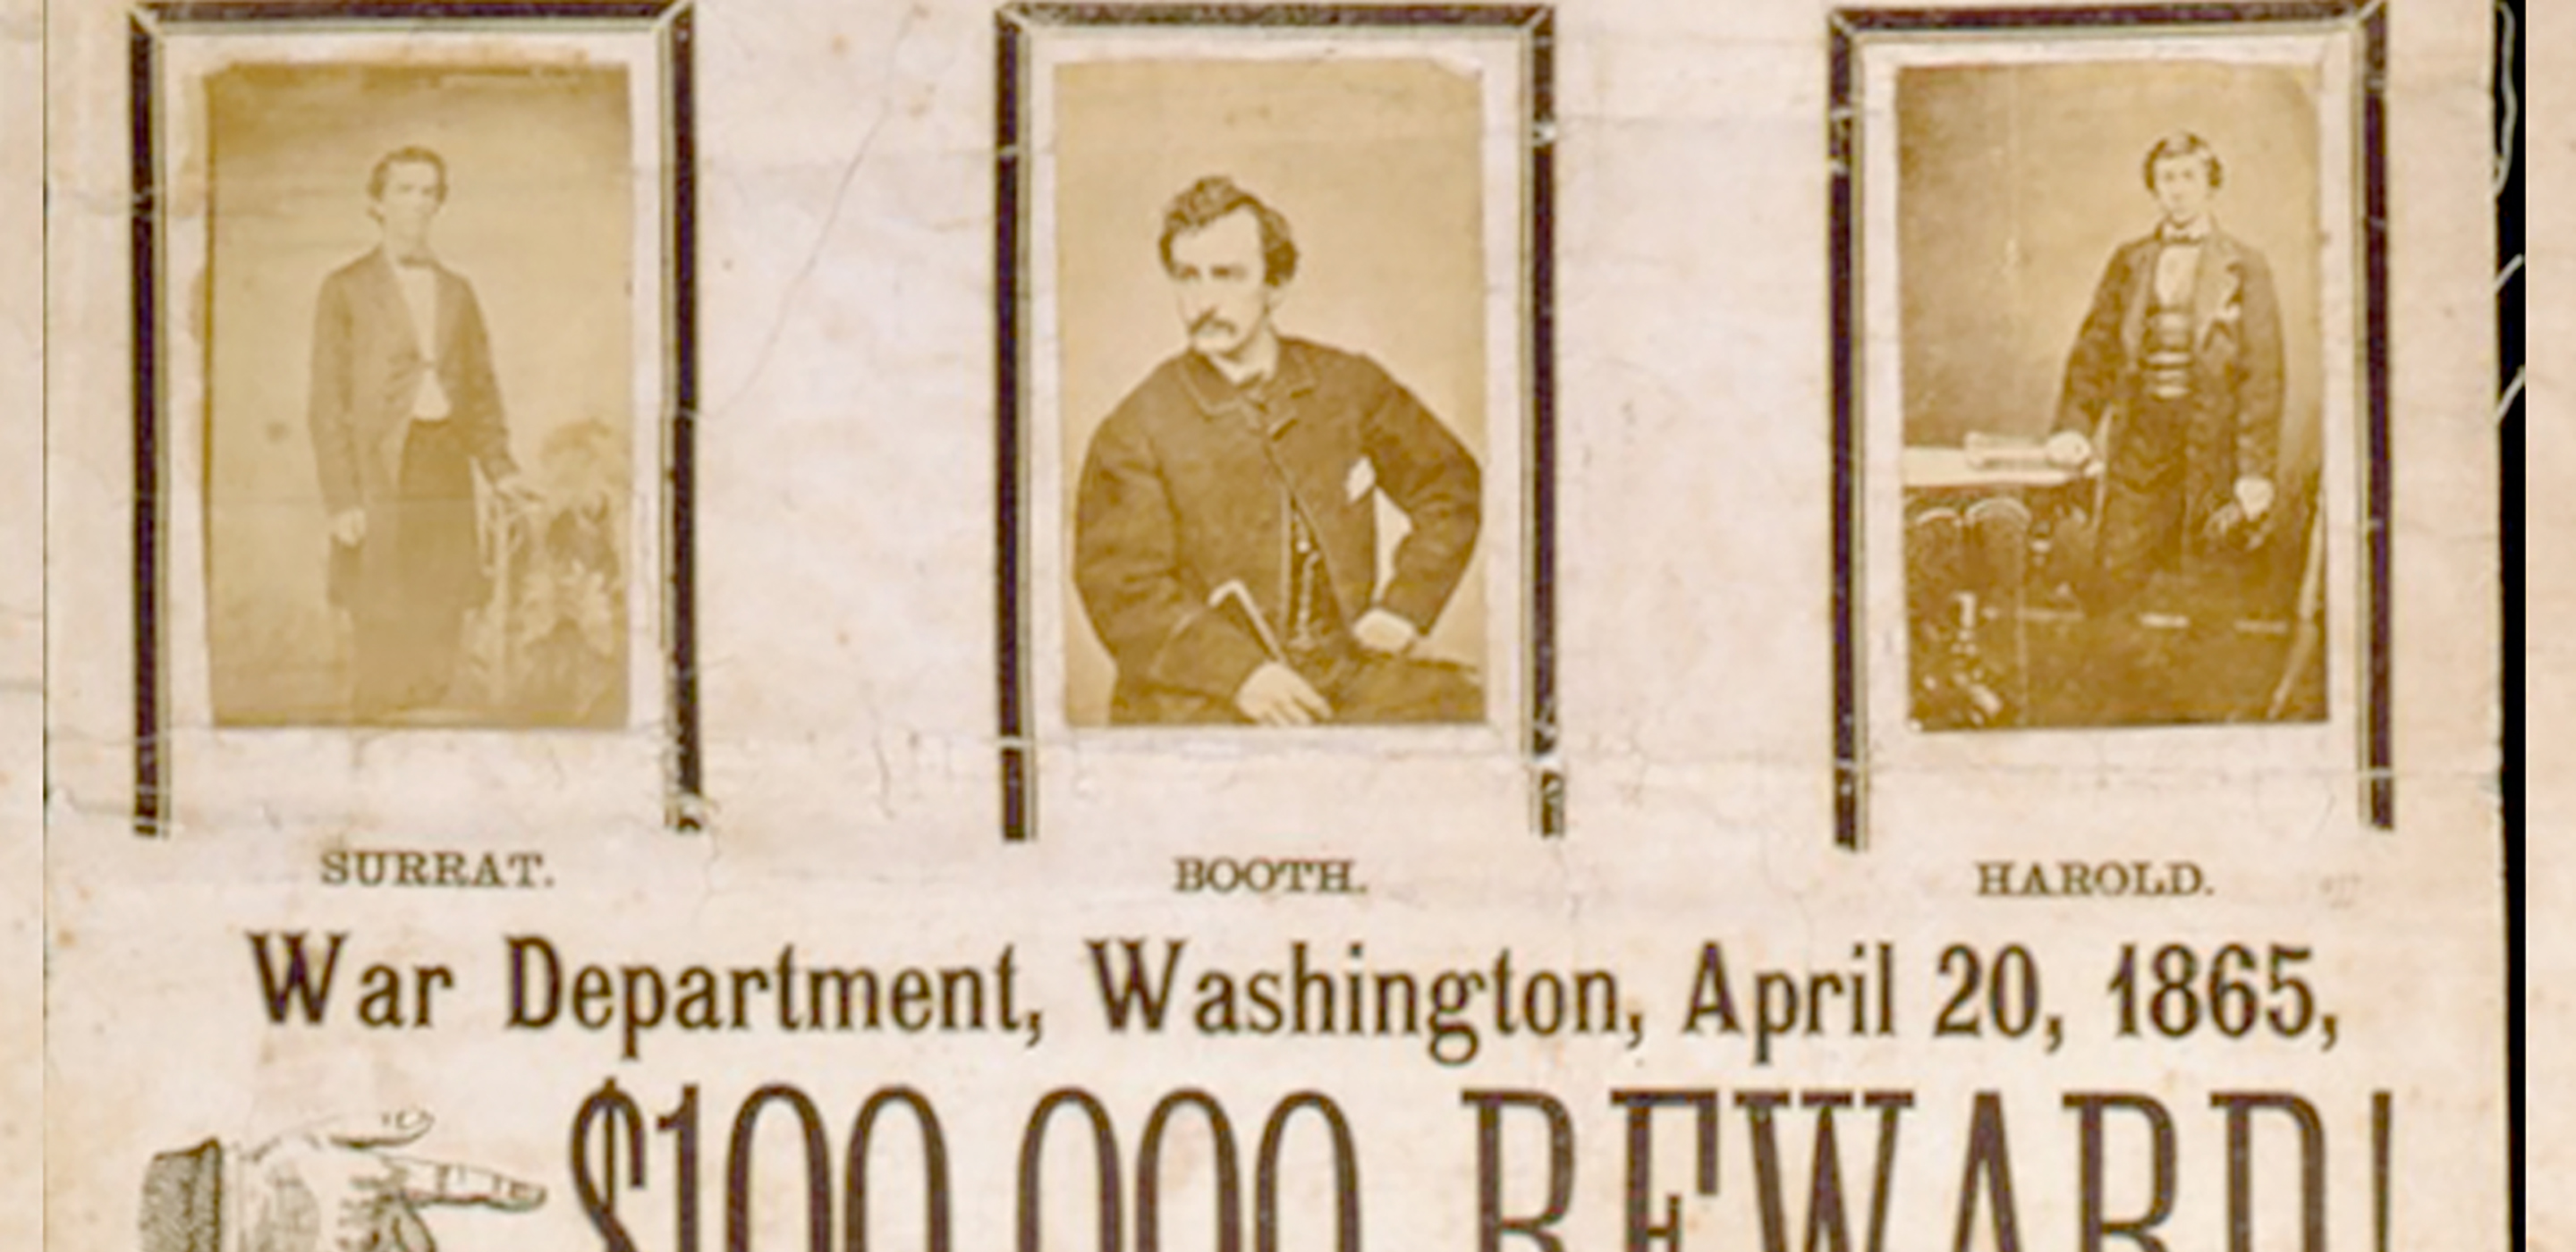 Image of wanted poster for John Wilkes Booth and his fellow conspirators.